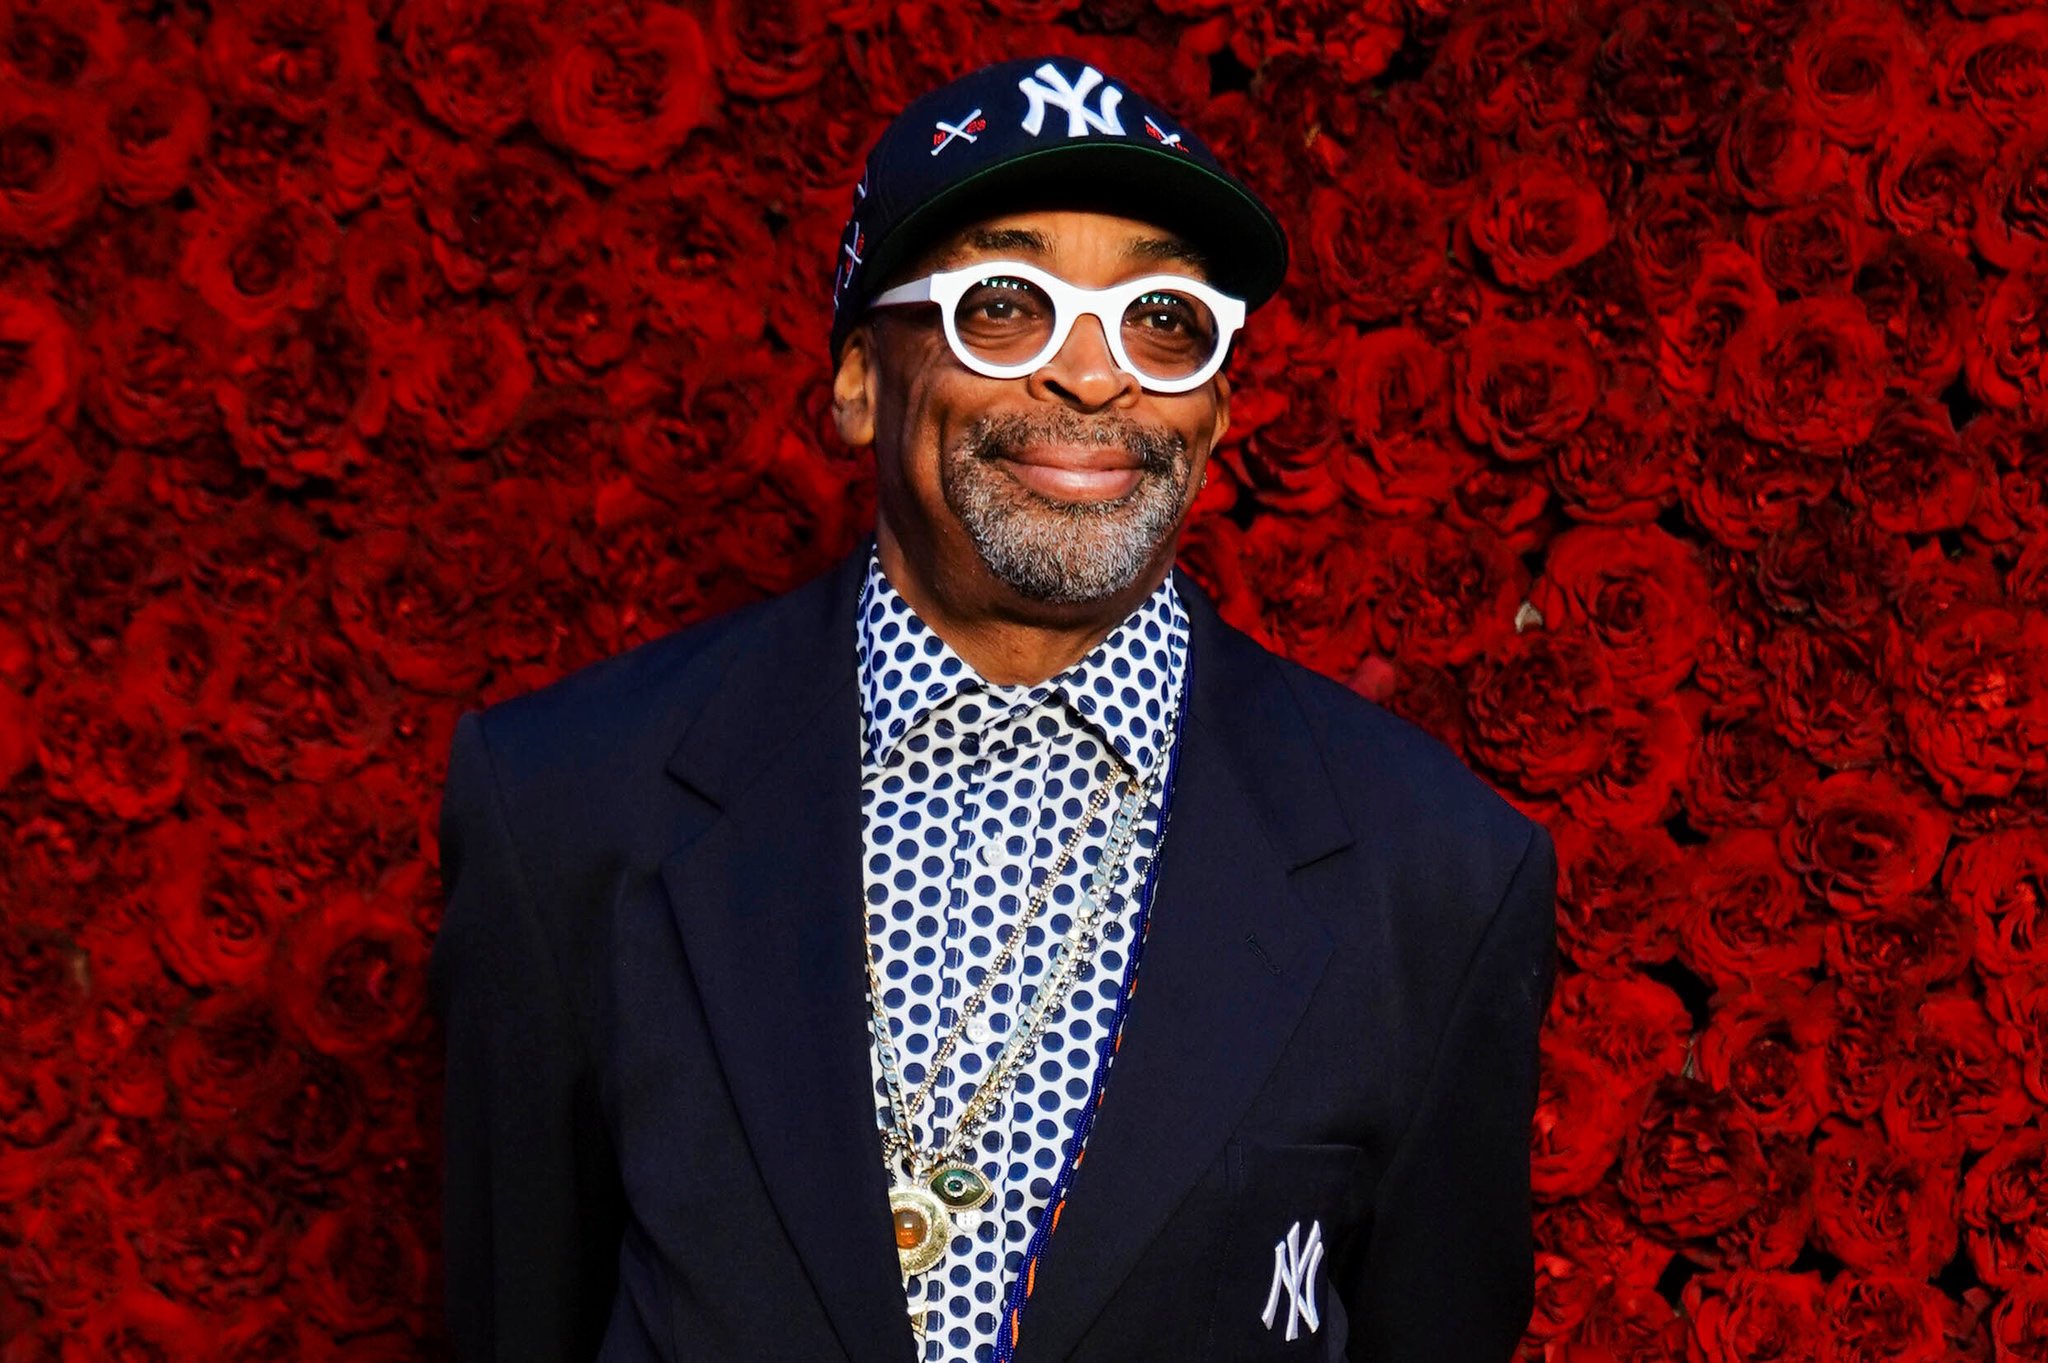 Wishing a happy birthday to the incomparable Spike Lee. 